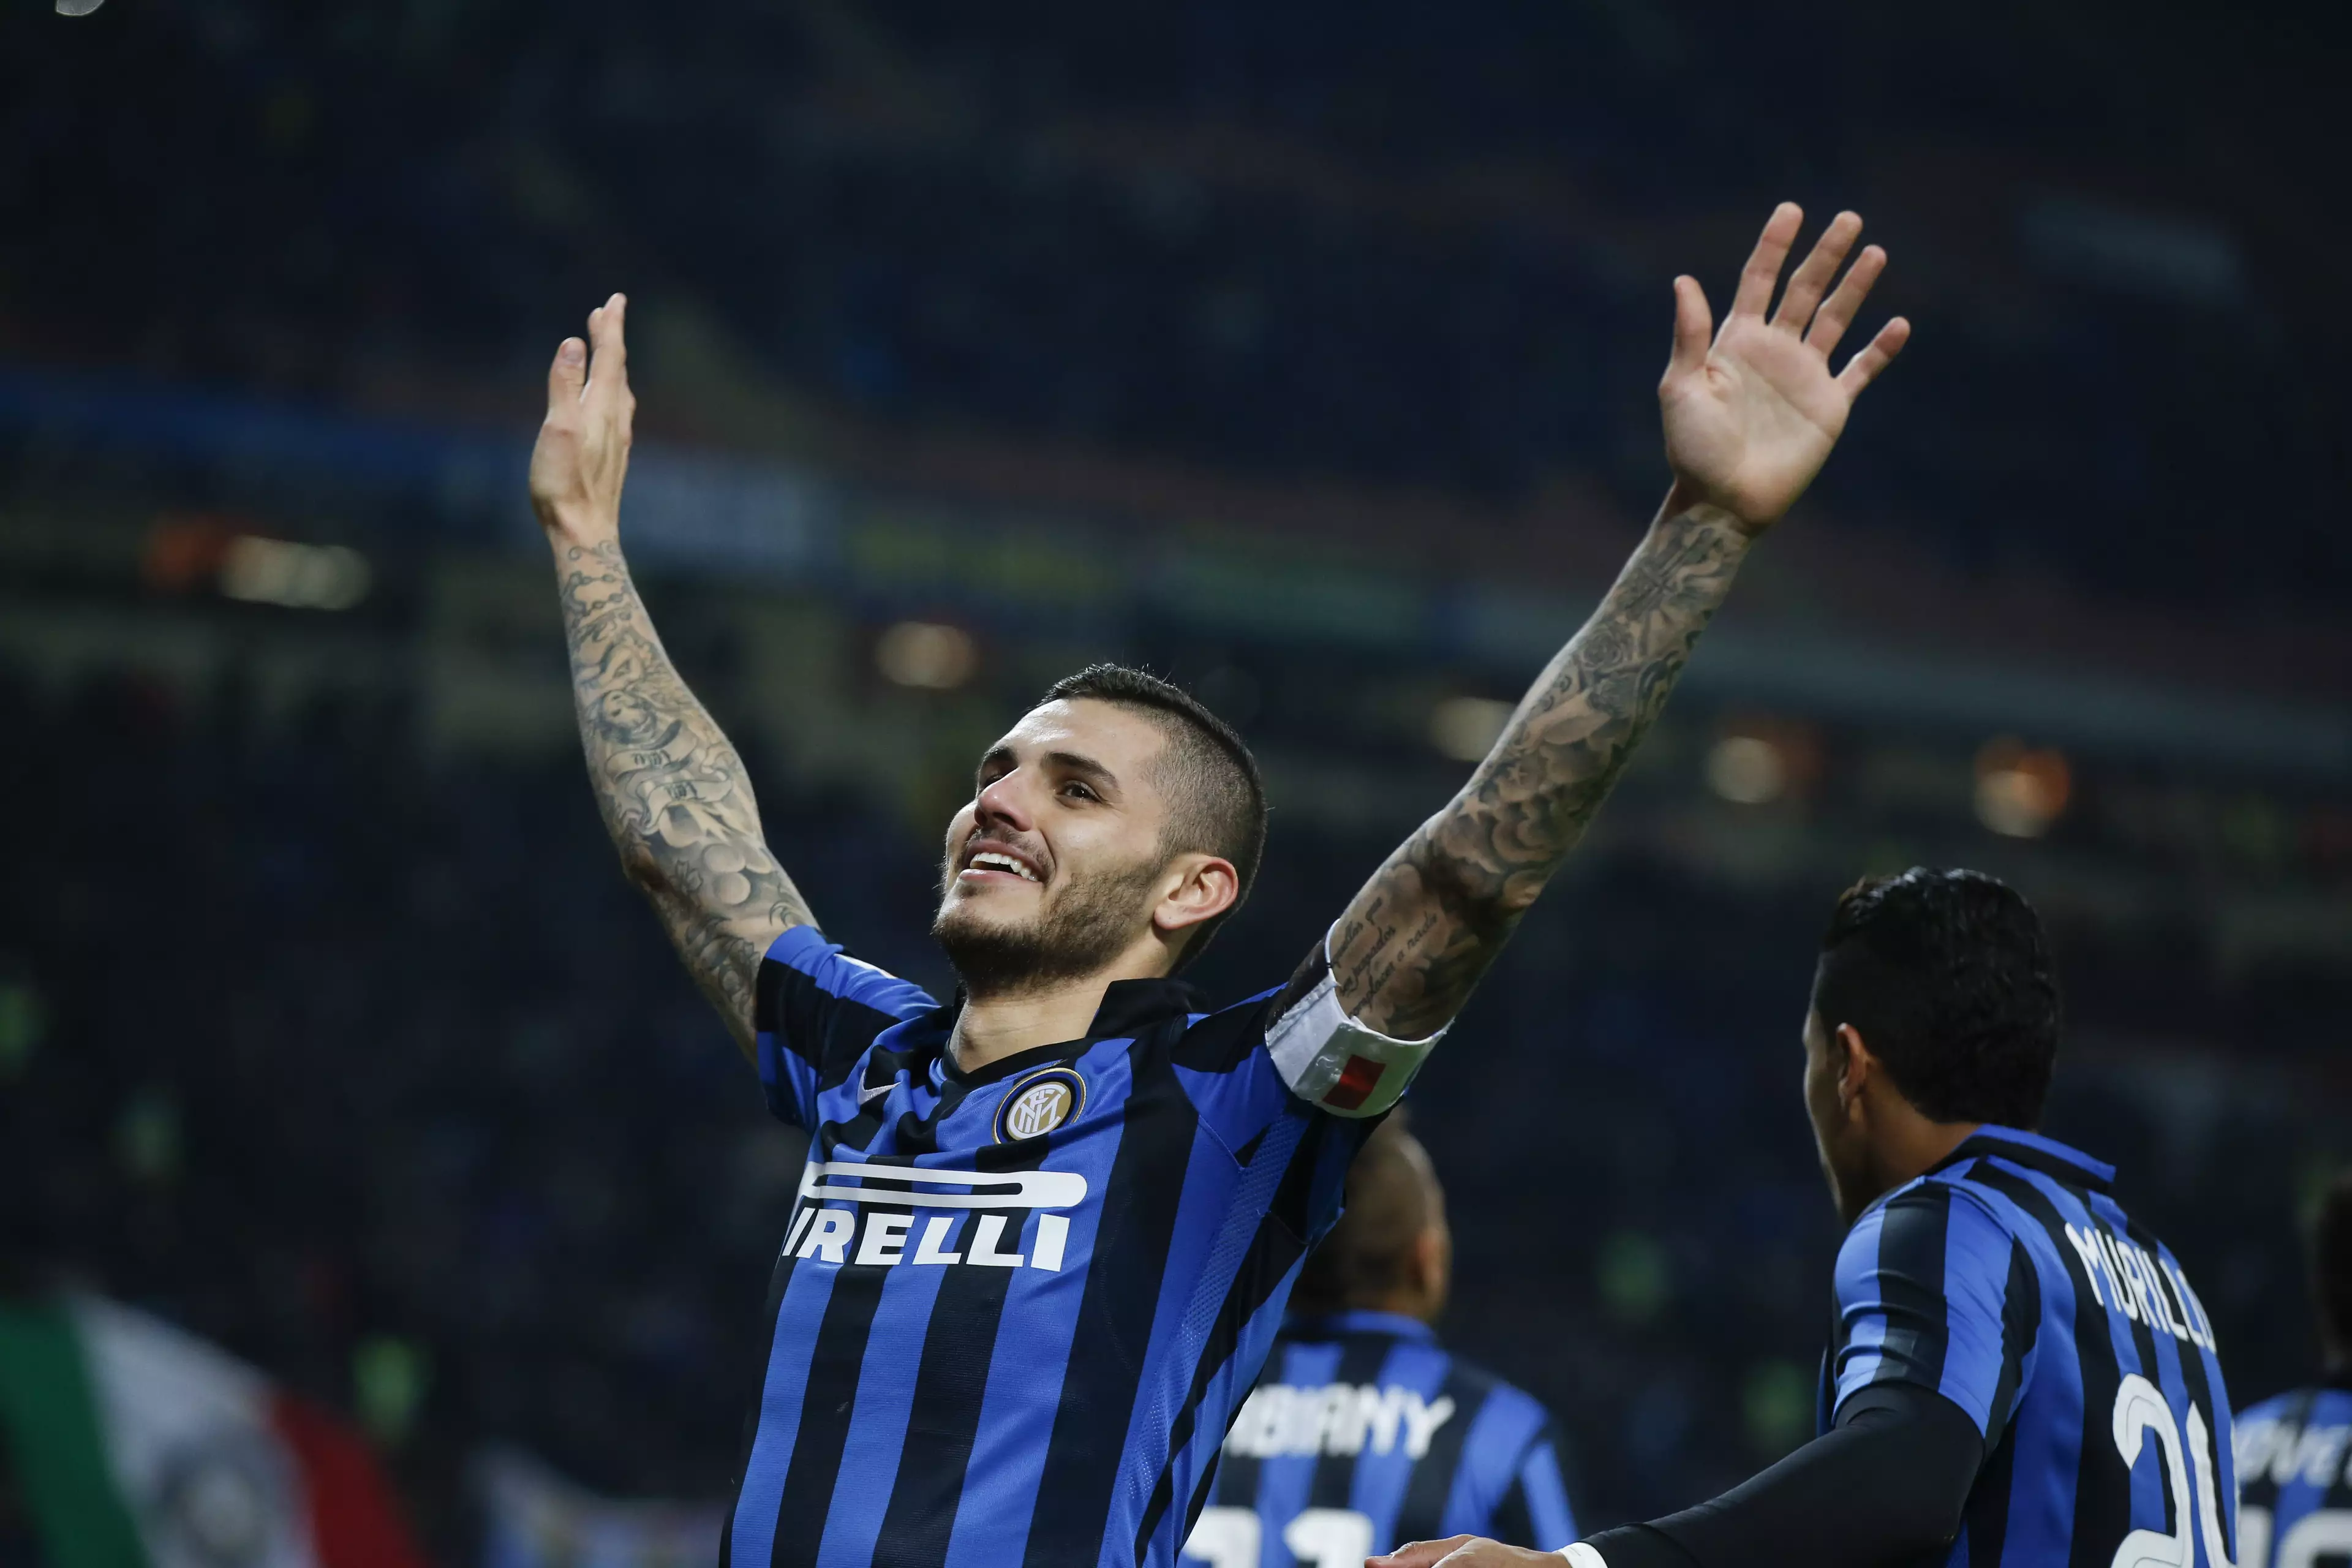 Mauro Icardi in happier times at Inter. Image: PA Images